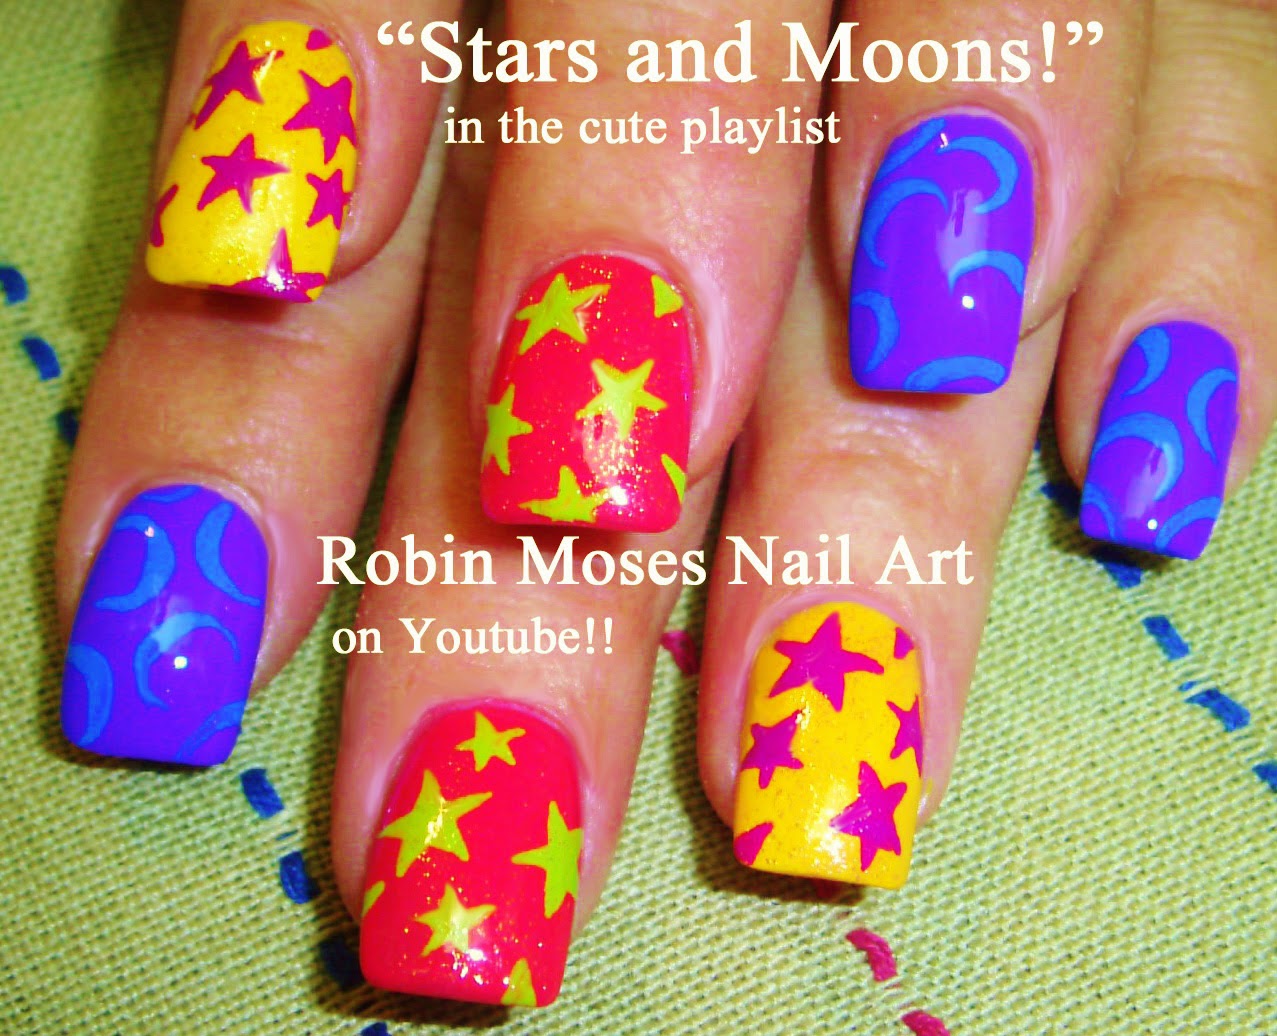 7. Moon and Star Nail Art Glitter - wide 1